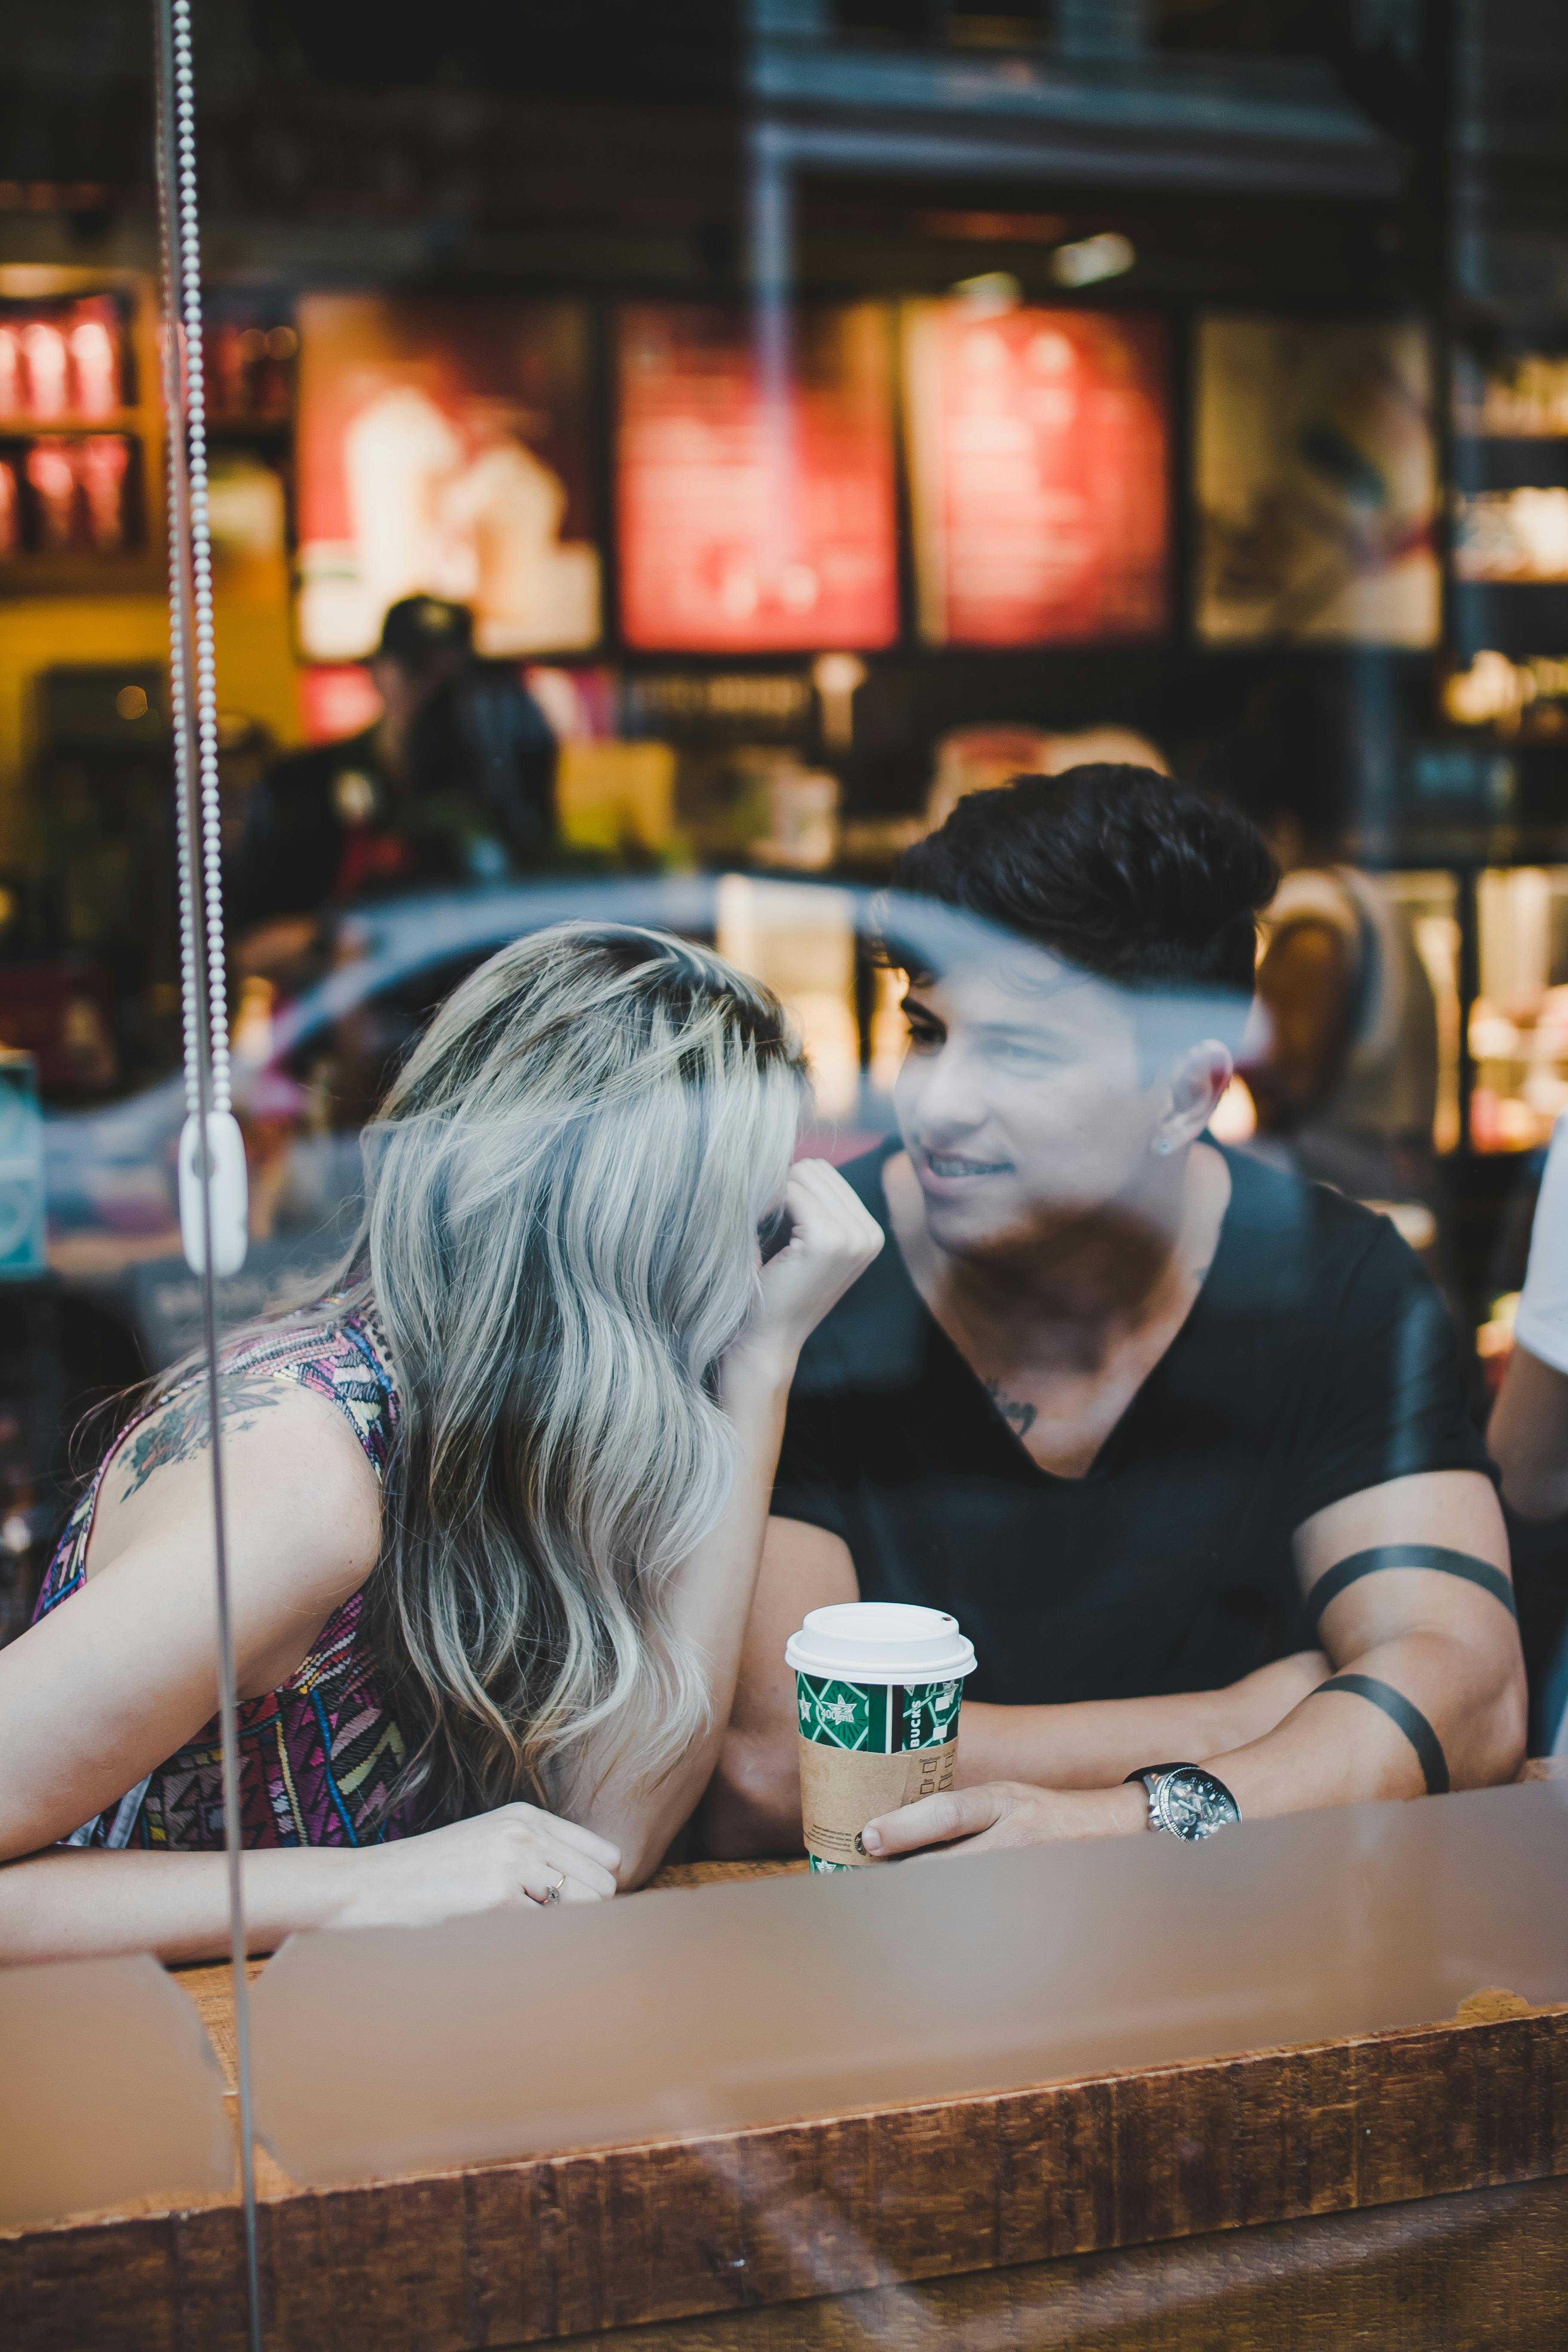 A happy couple having beverages at a shopping center | Source: Pexels